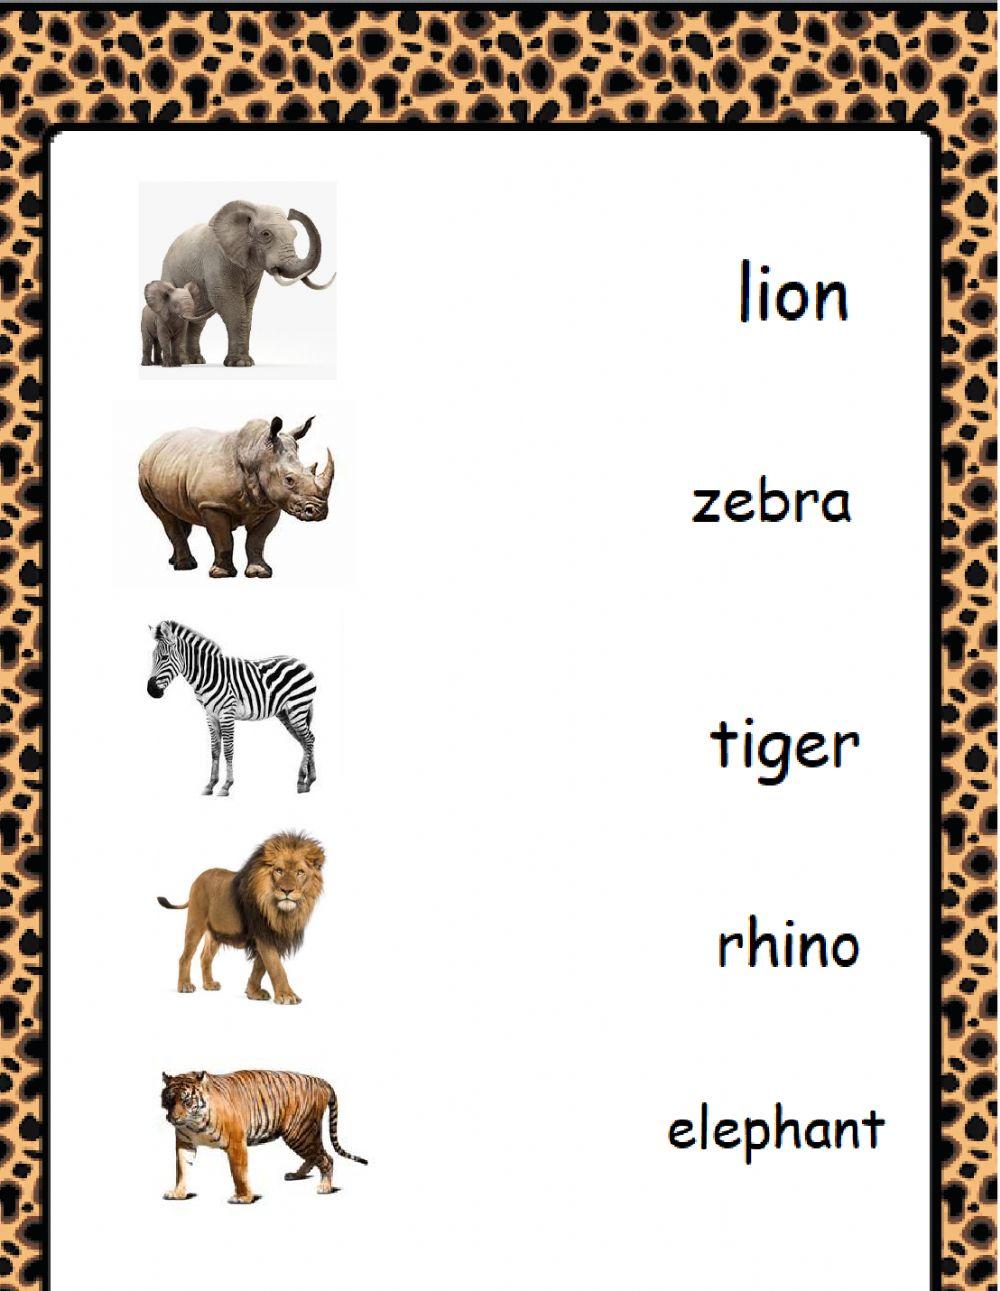 Review animals